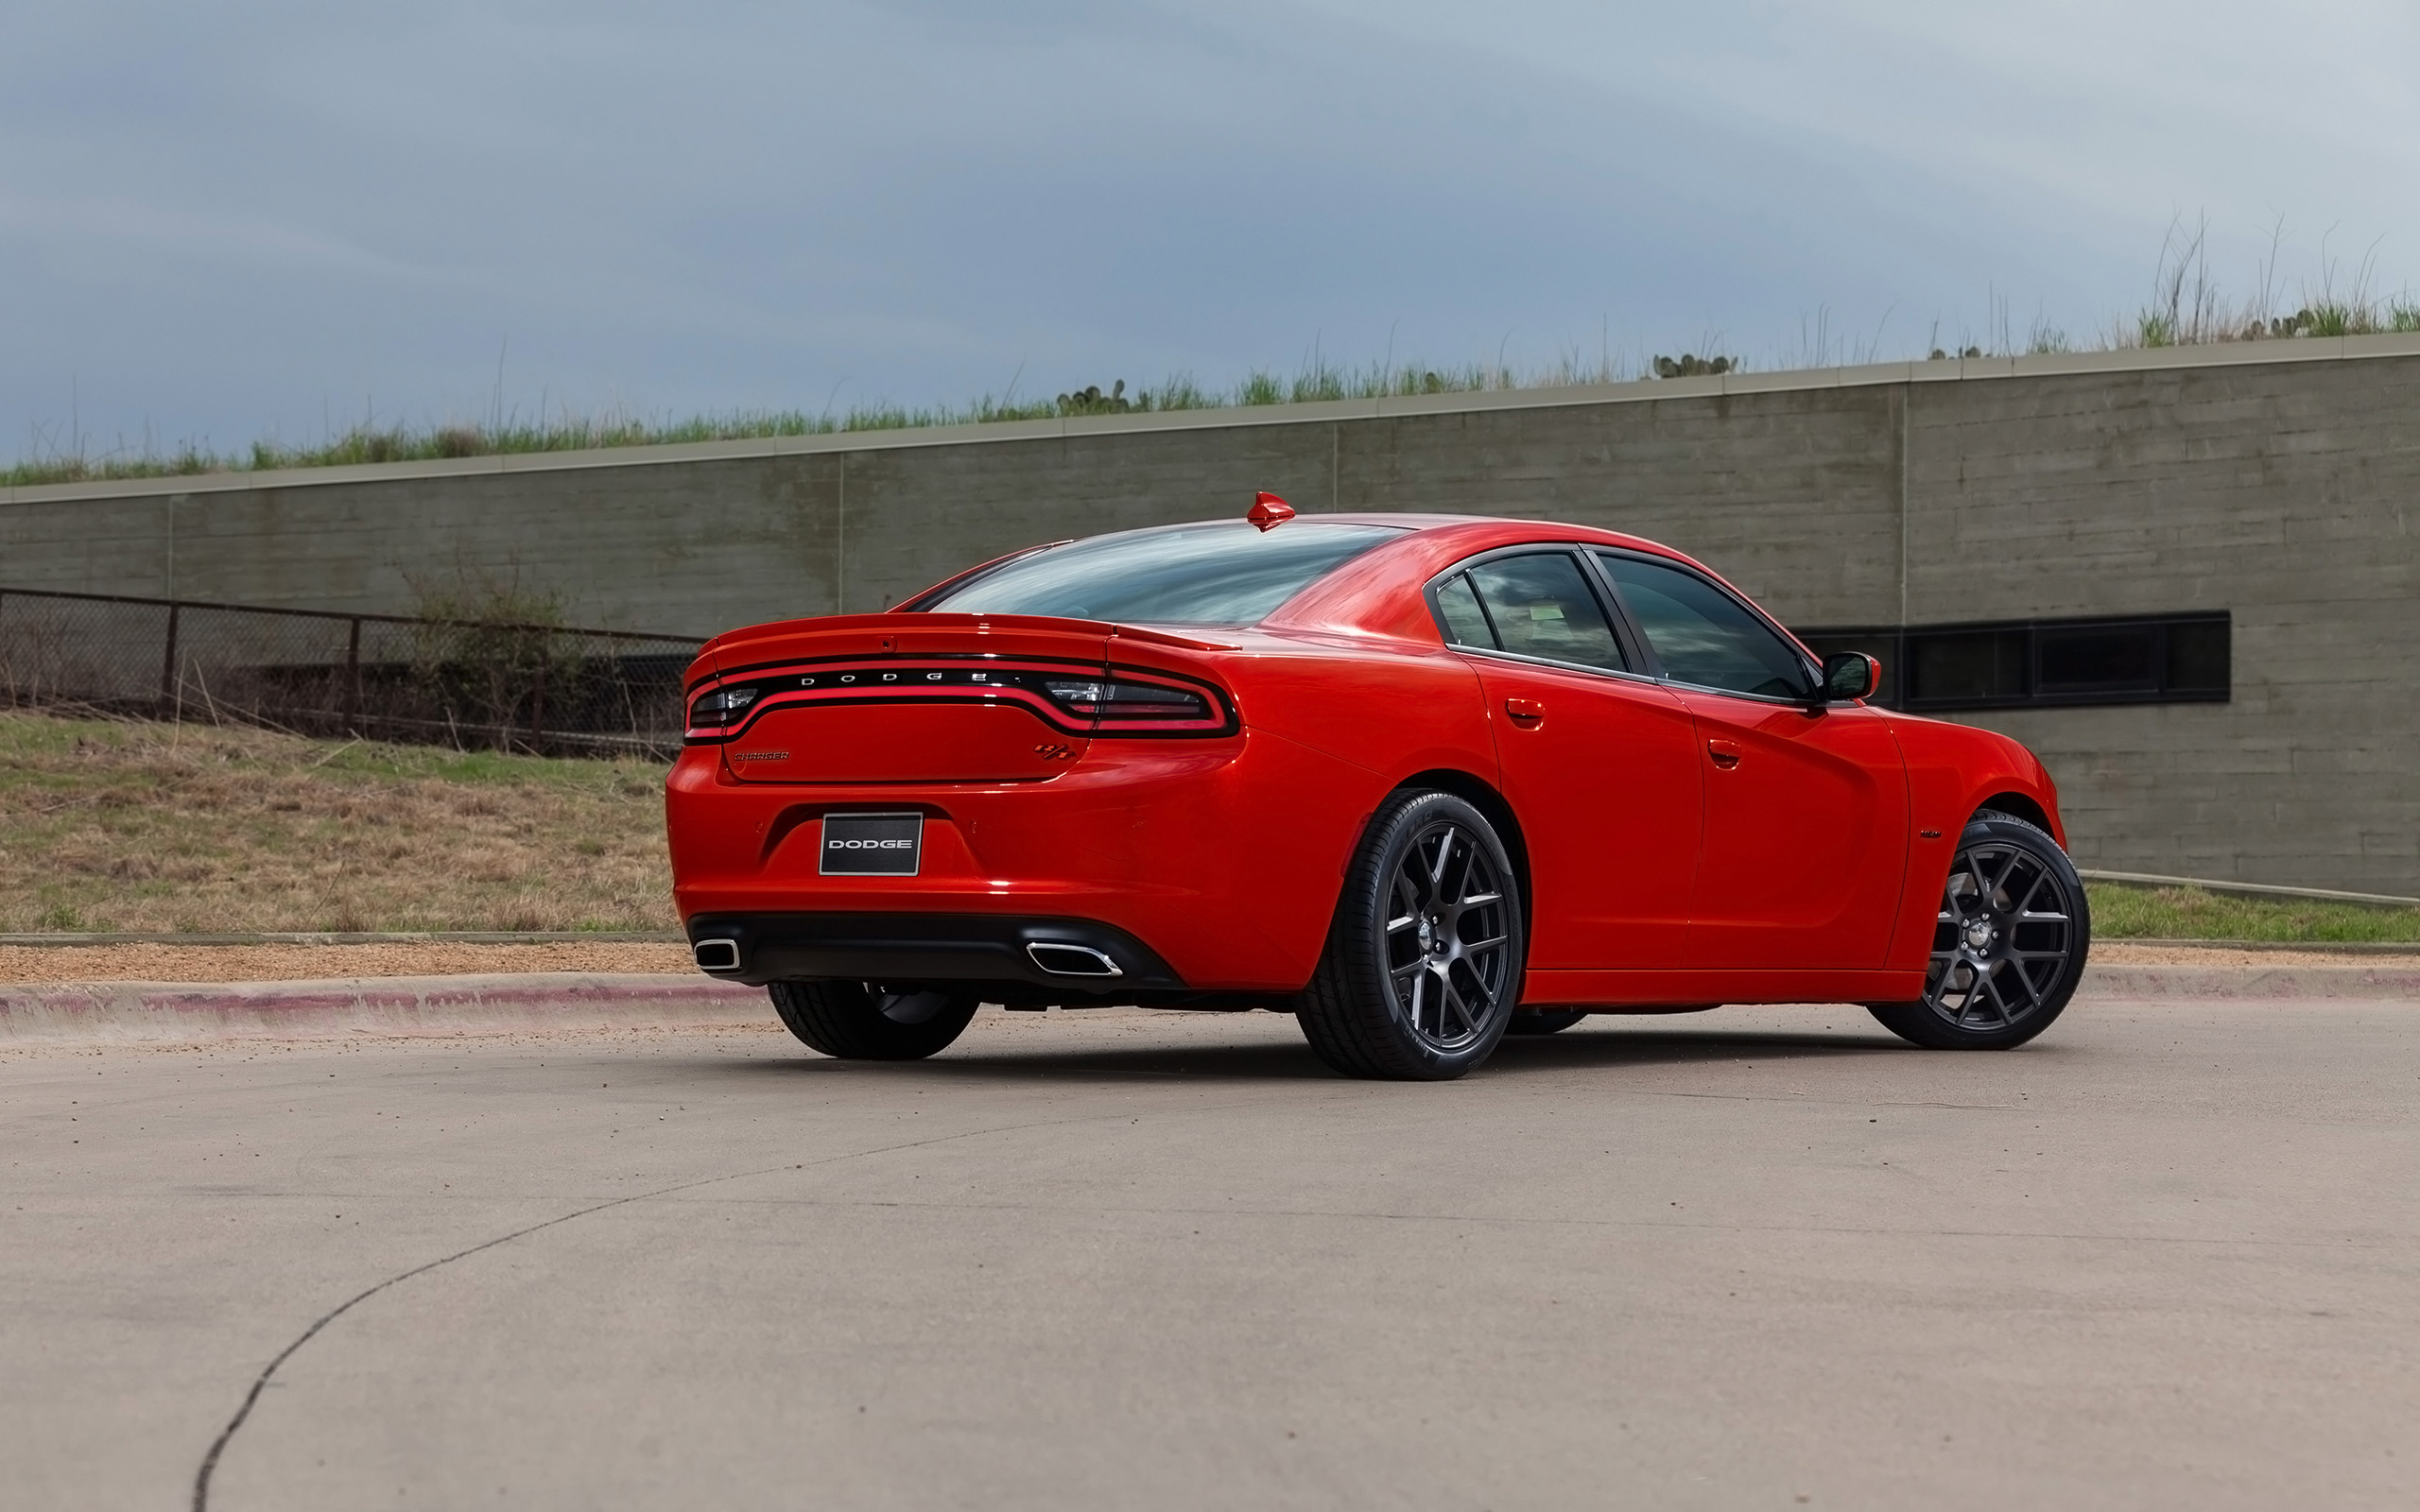  2015 Dodge Charger Wallpaper.